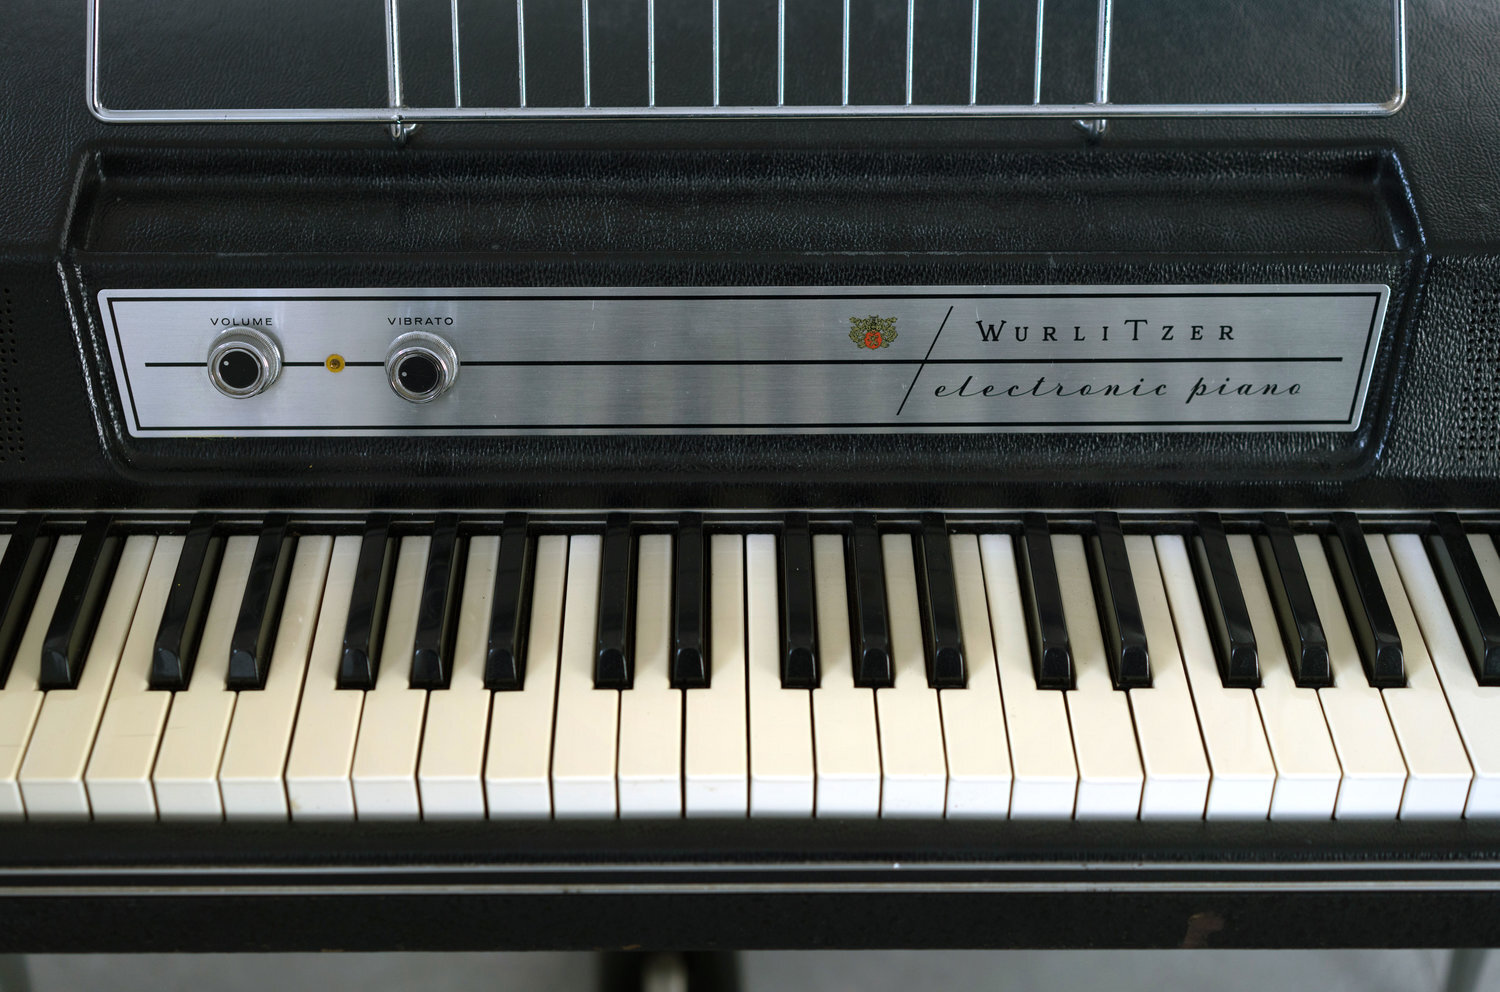 What's the Difference Between a Wurlitzer 200 and 200a?